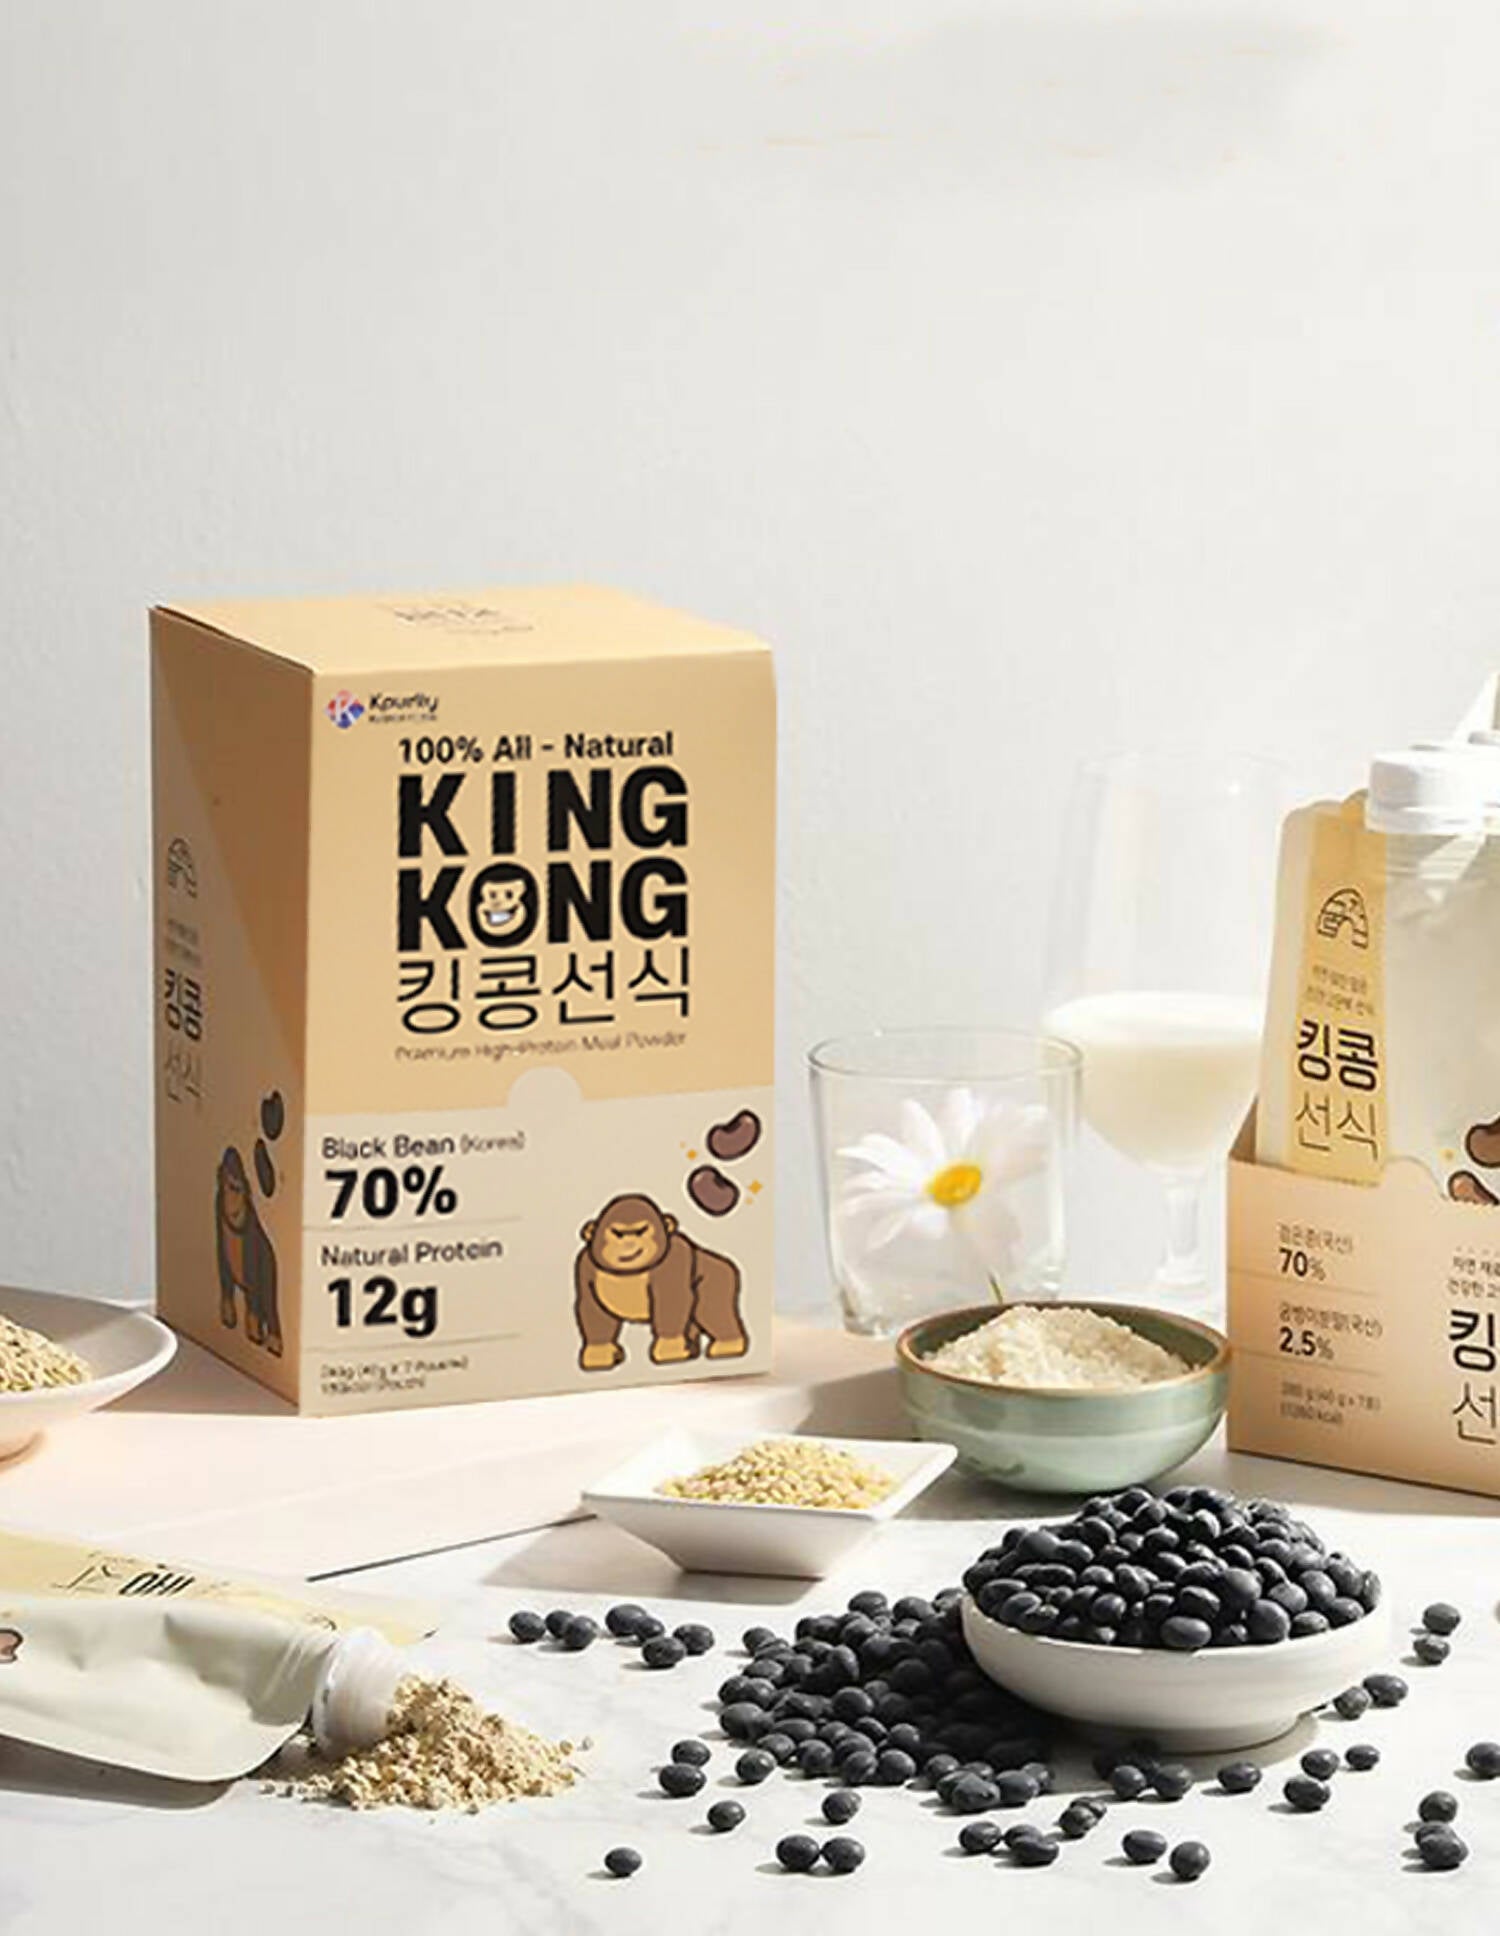 KingKong High Protein Powder 1 Box (7 Pouch) - Mixed Grain Powder Meal Replacement Shake Breakfast Simple Meal - High Protein, No Artificial Flavor or Sweeteners